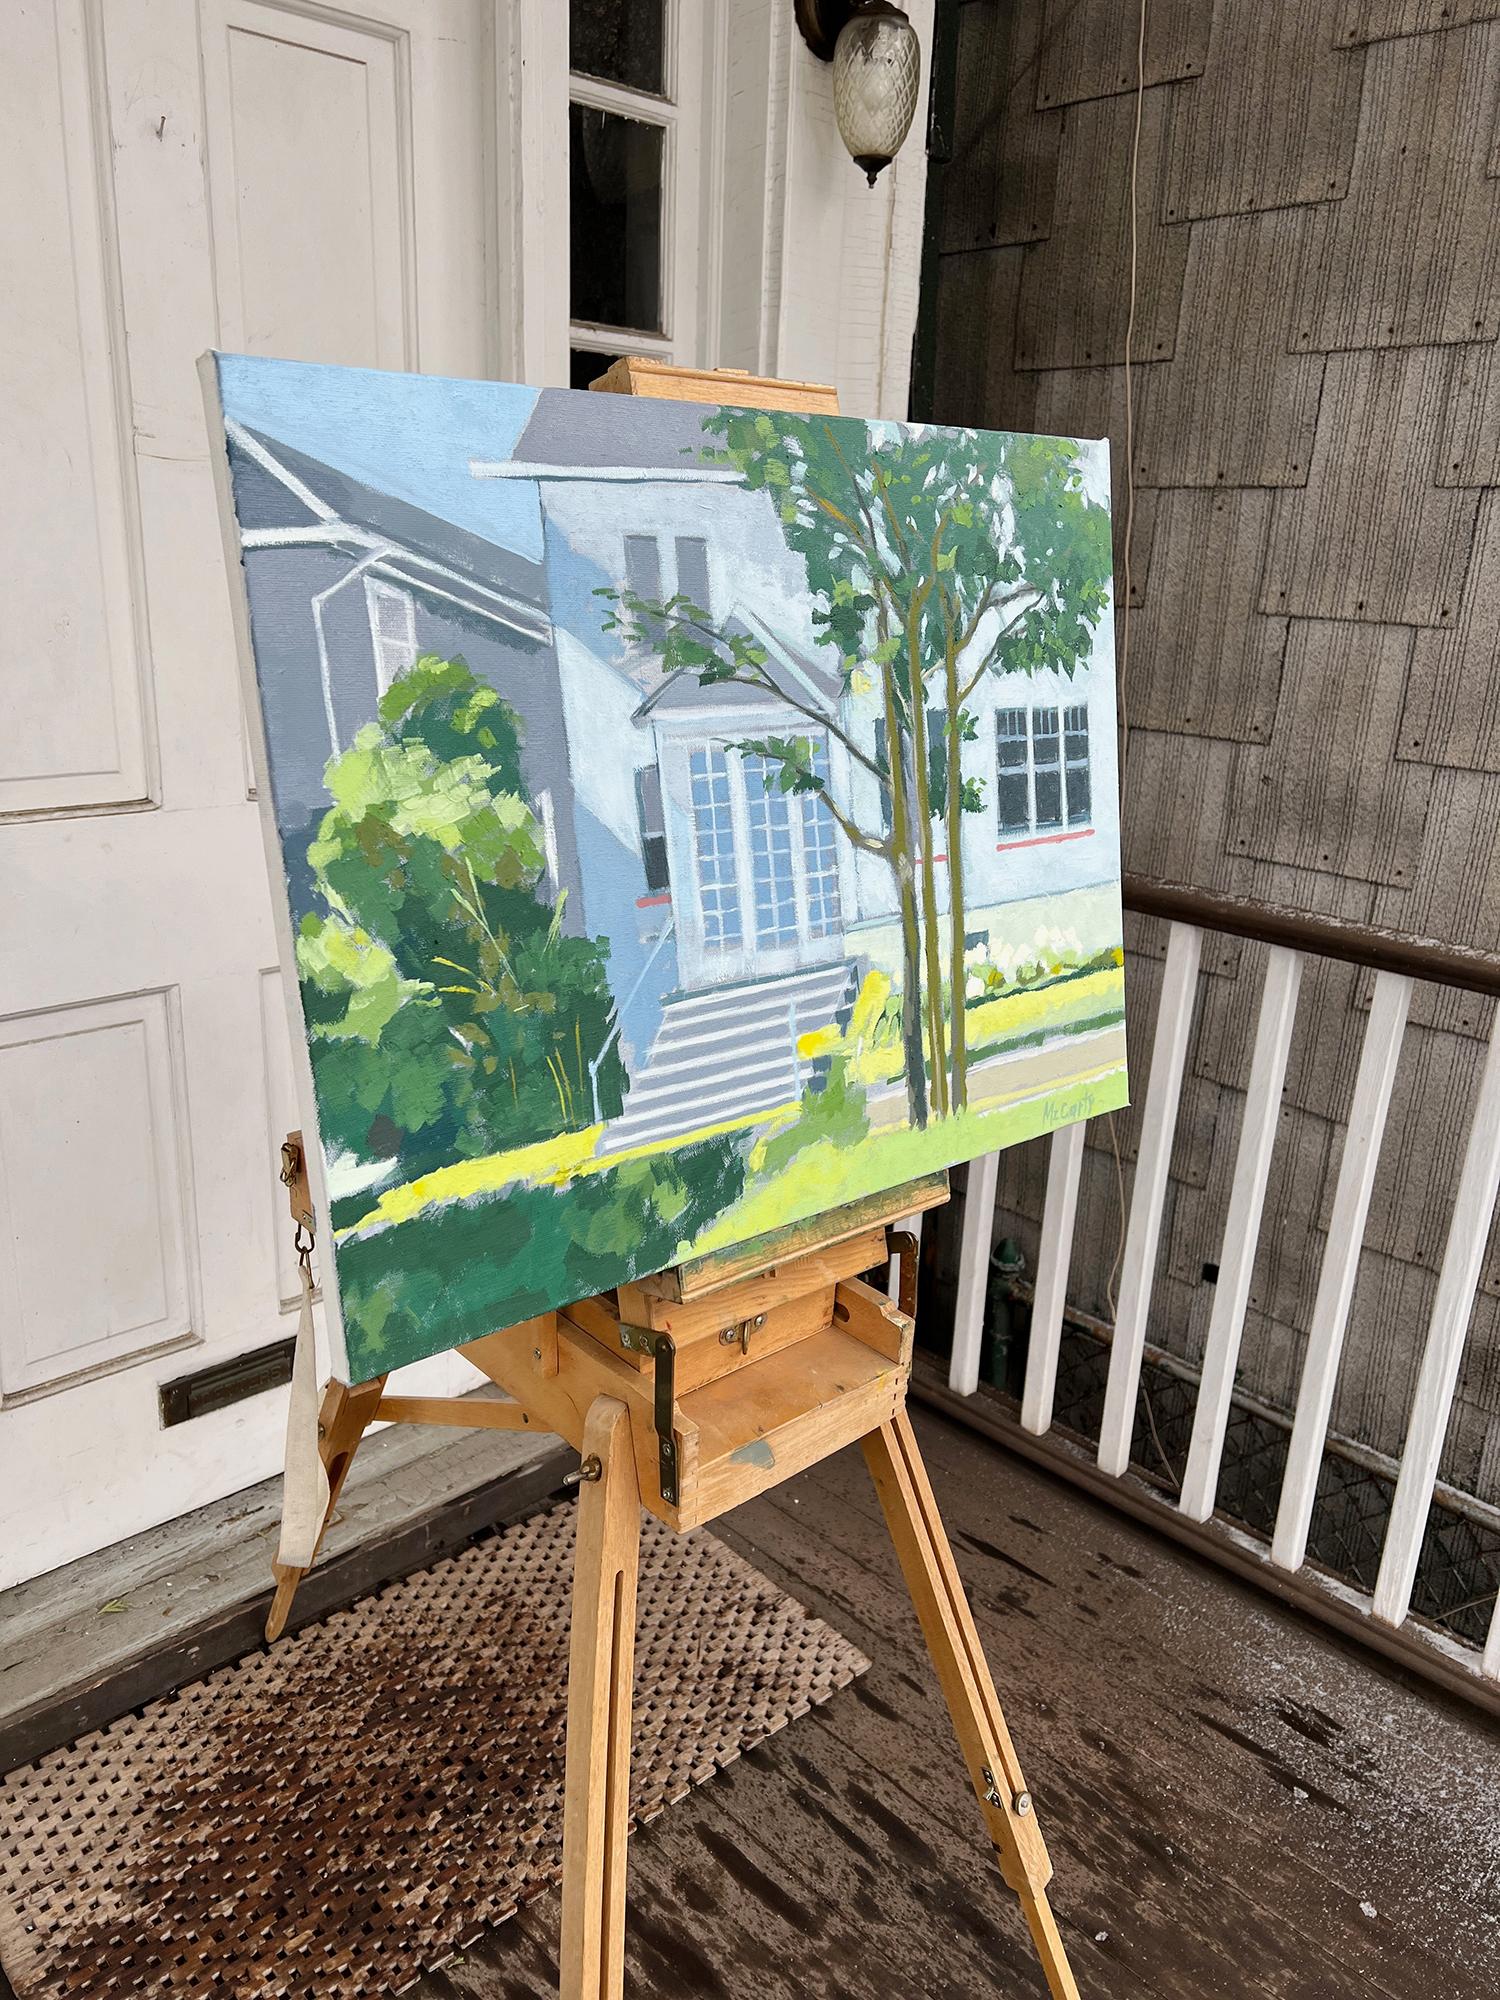 <p>Artist Comments<br>Somewhere in Cape May, New Jersey, a pale blue house stands as an inviting retreat on a summer afternoon. Bathed in the soft glow of natural light and enriched by shadows, the surrounding greens come alive in this picturesque